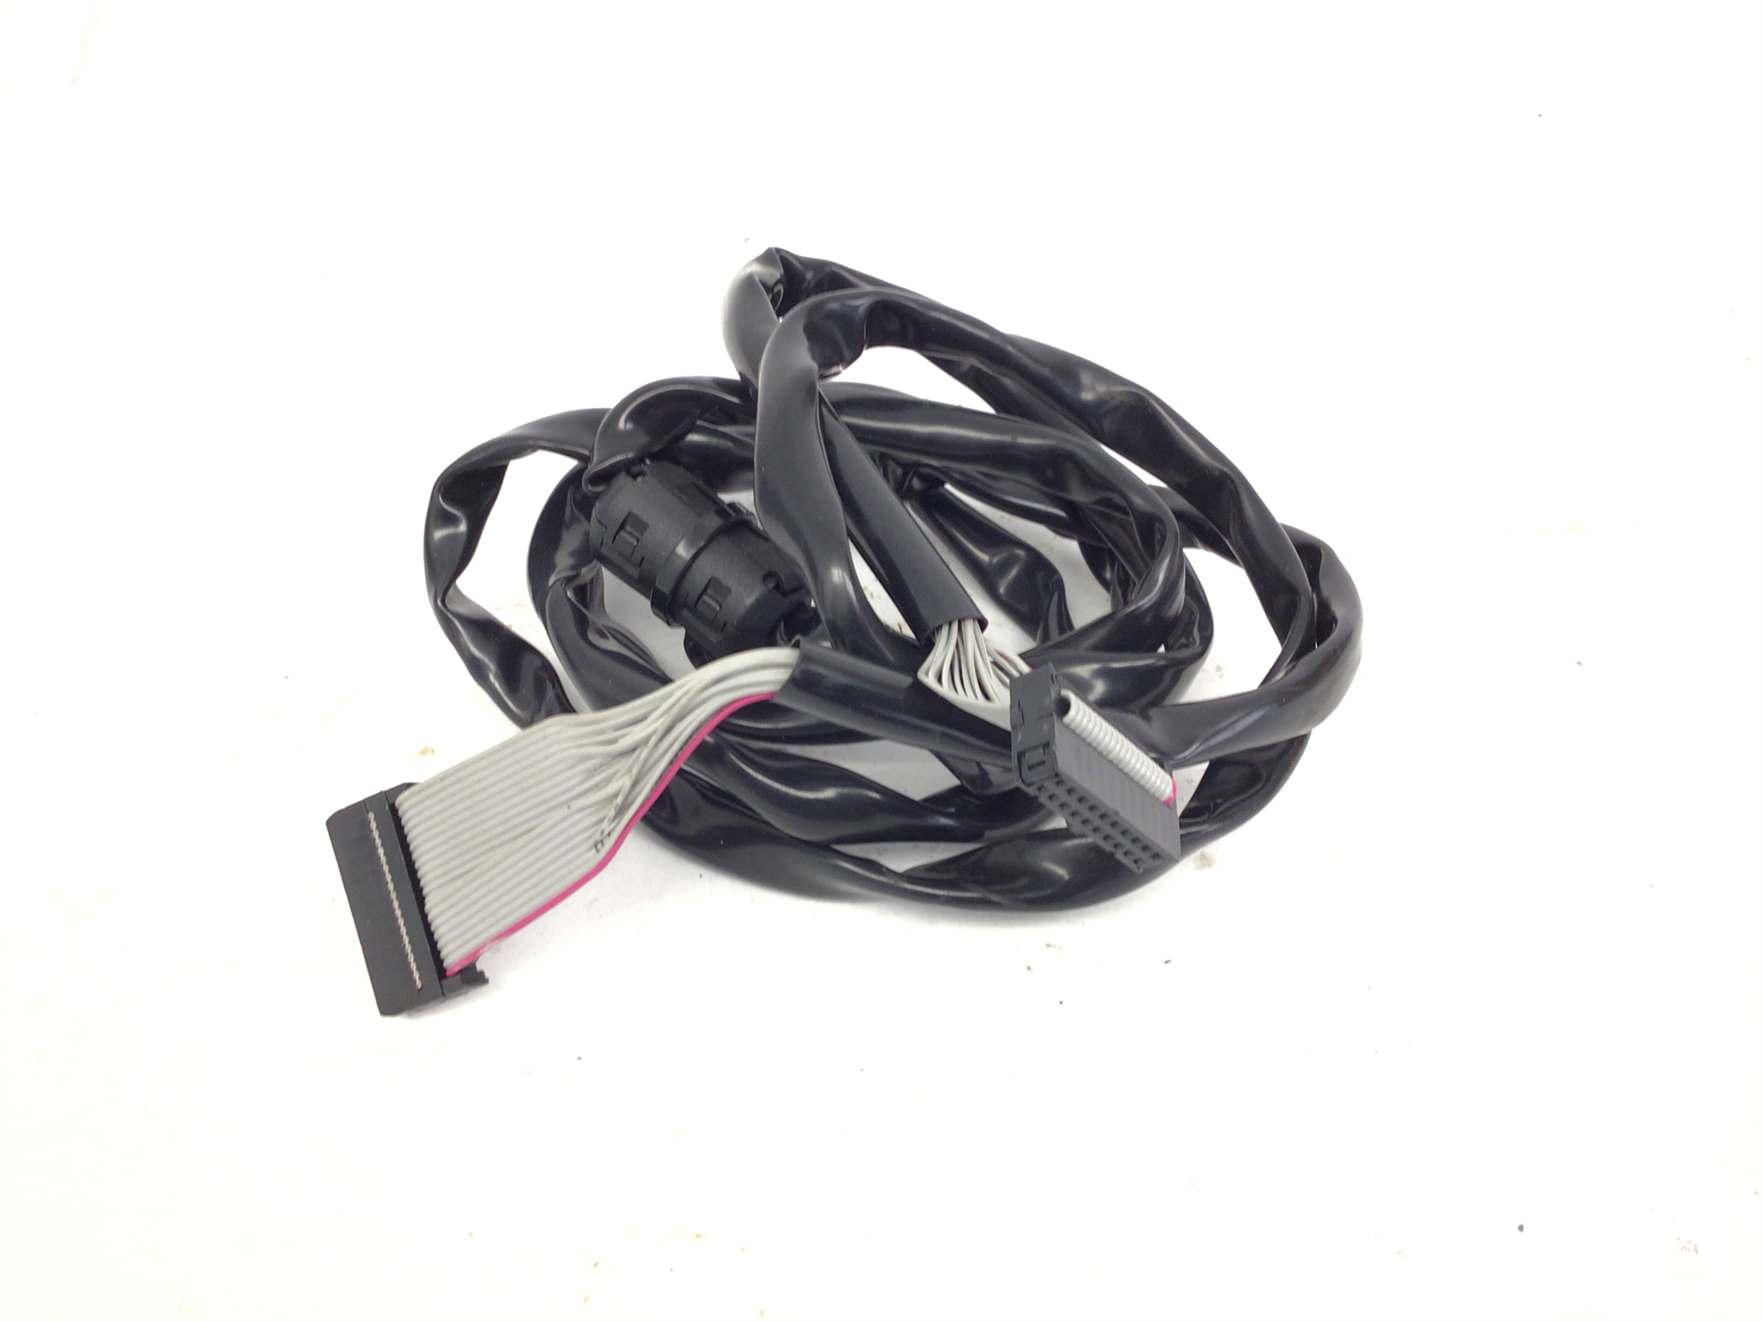 Communications Data Wire Harness Ribbon Cable (Used)